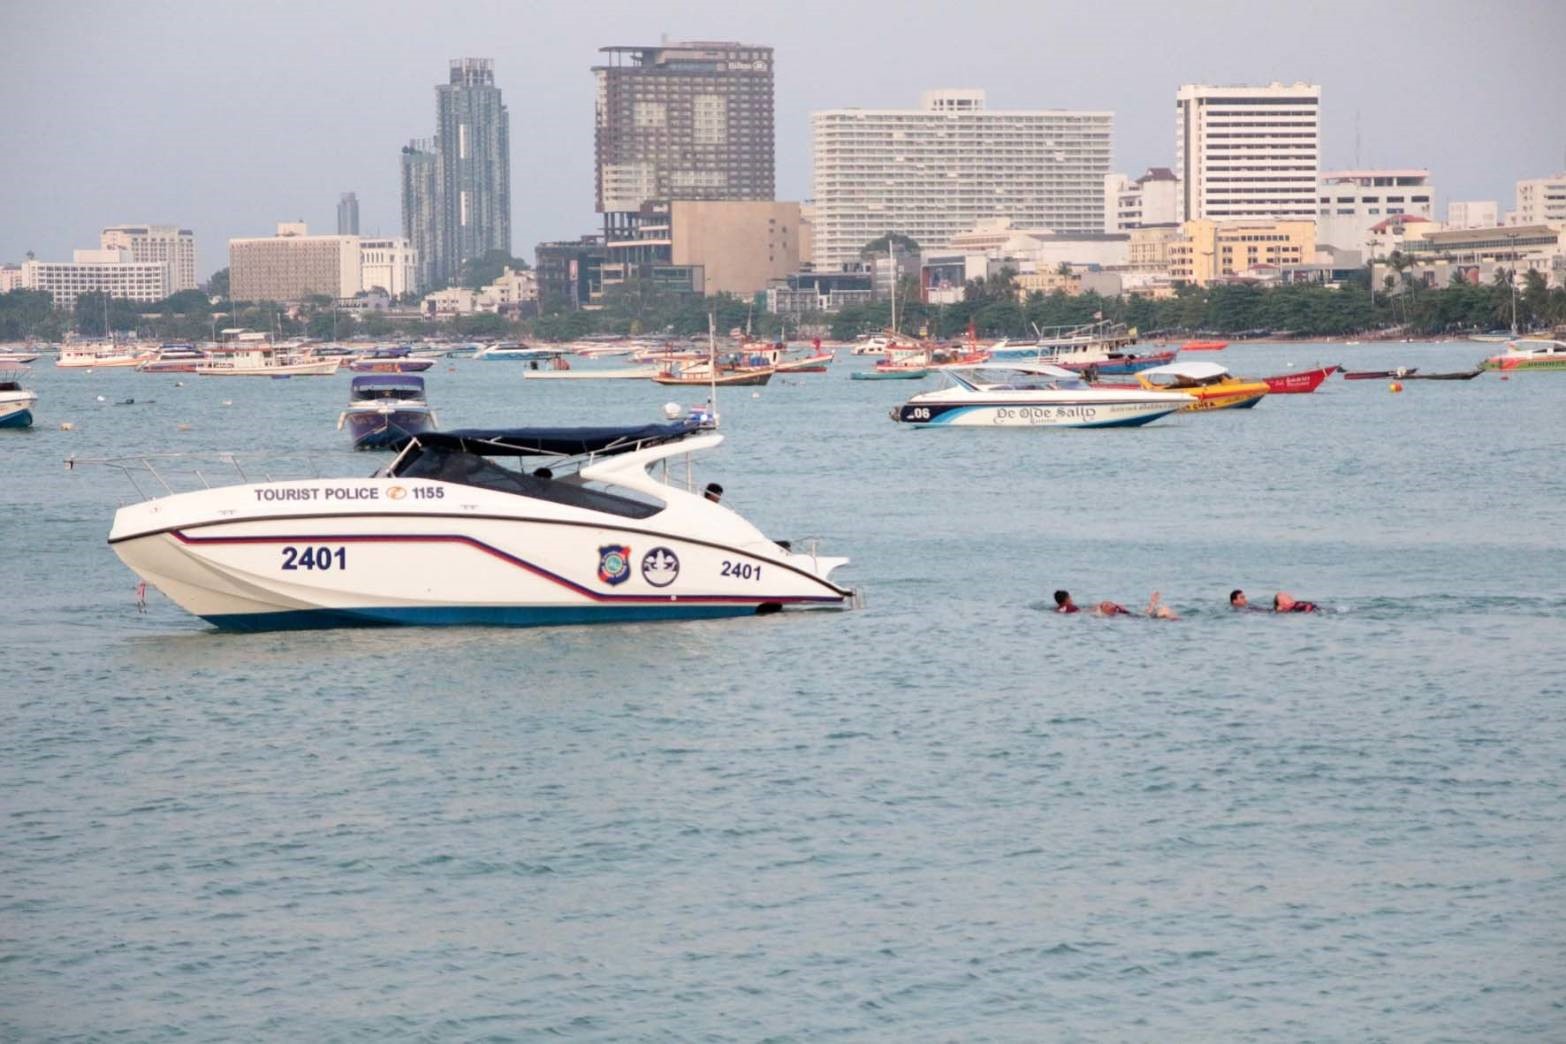 Pattaya’s Tourist Police Division office took delivery of new patrol boats aimed at keeping visitors safer in local waters.